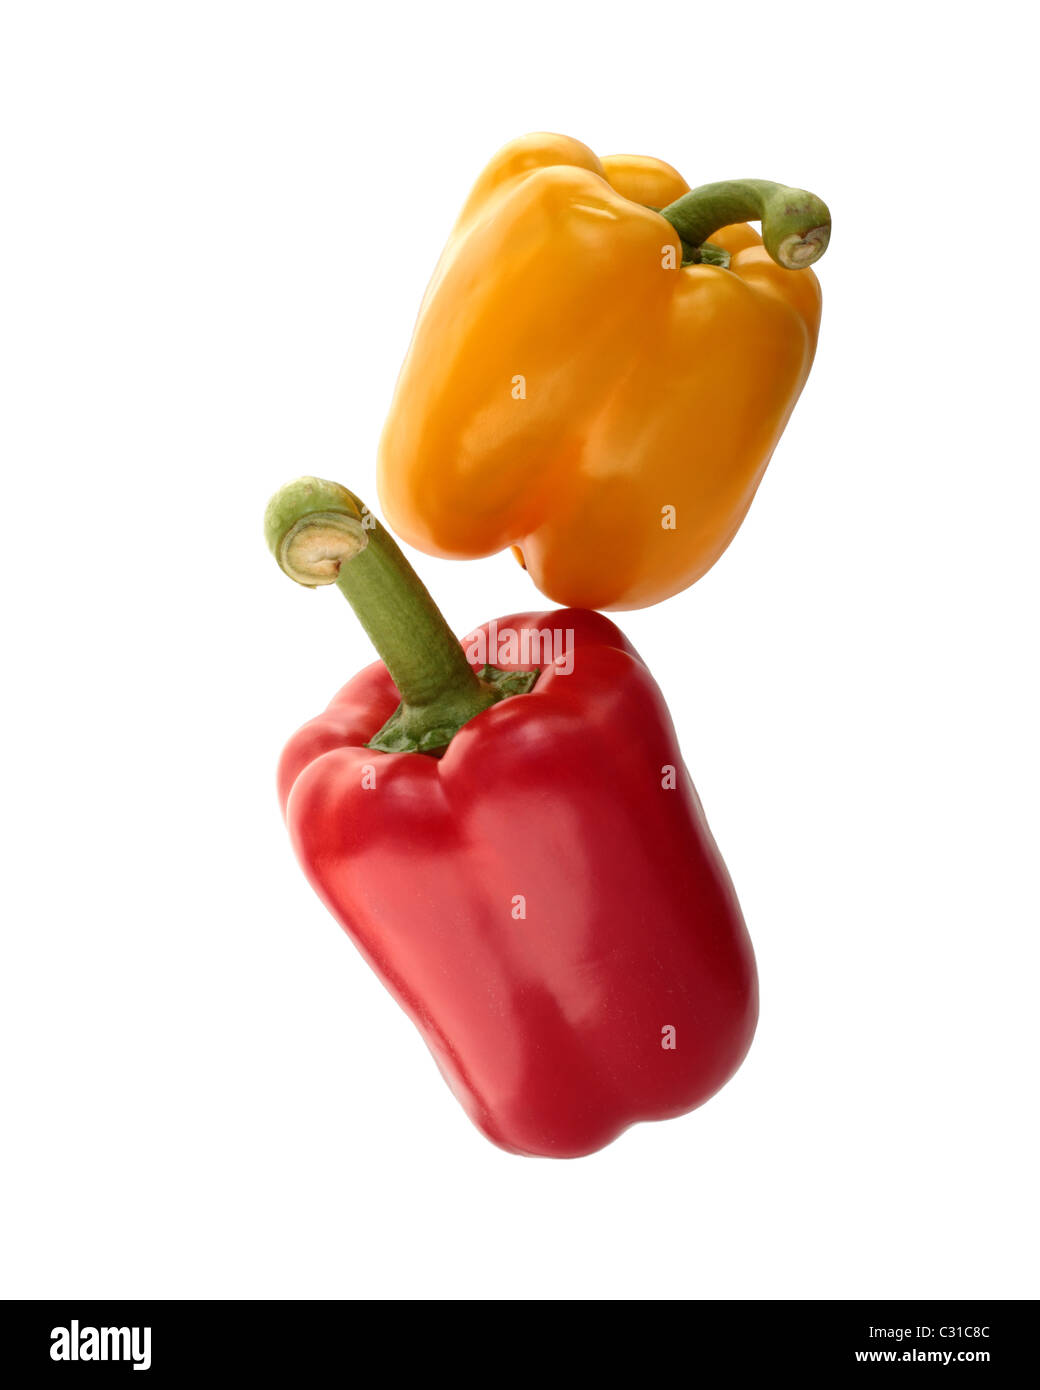 Yellow and red peppers stacked. Isolated on a white background. Stock Photo